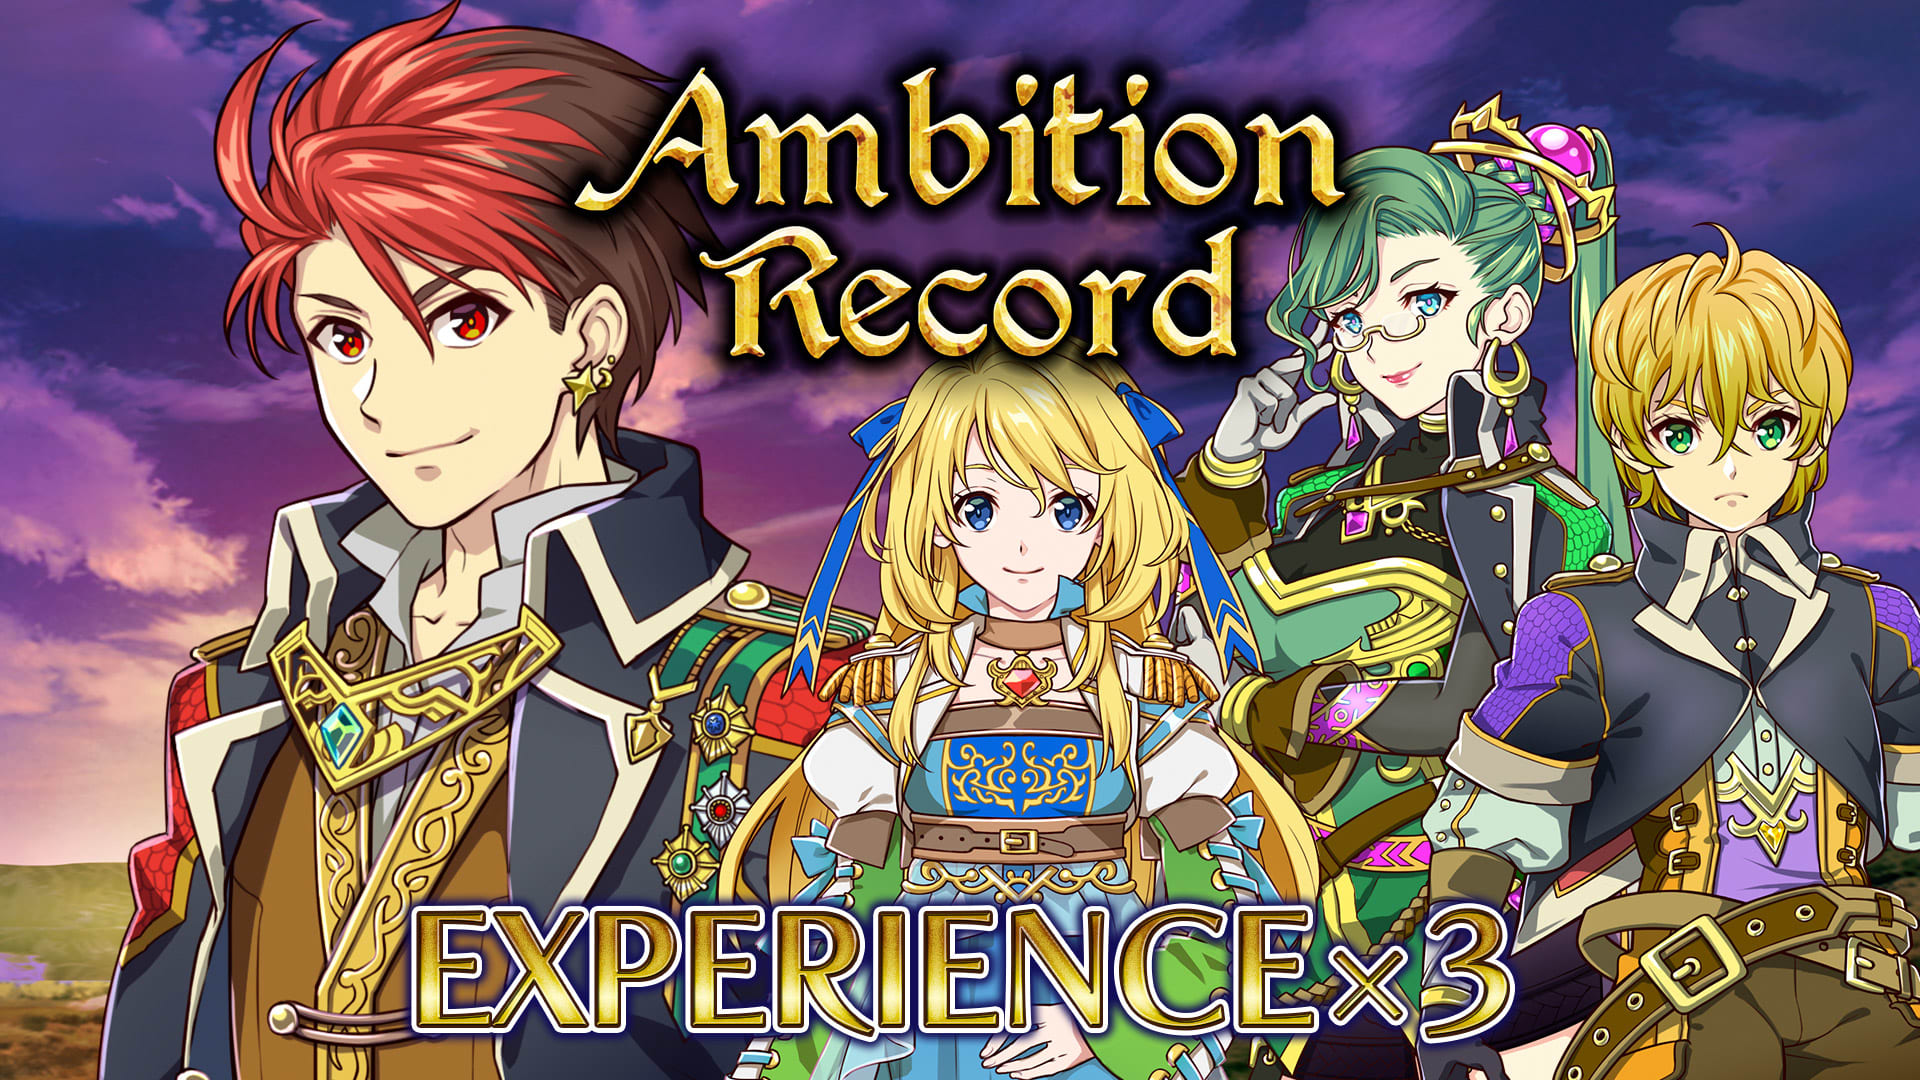 Experience x3 - Ambition Record